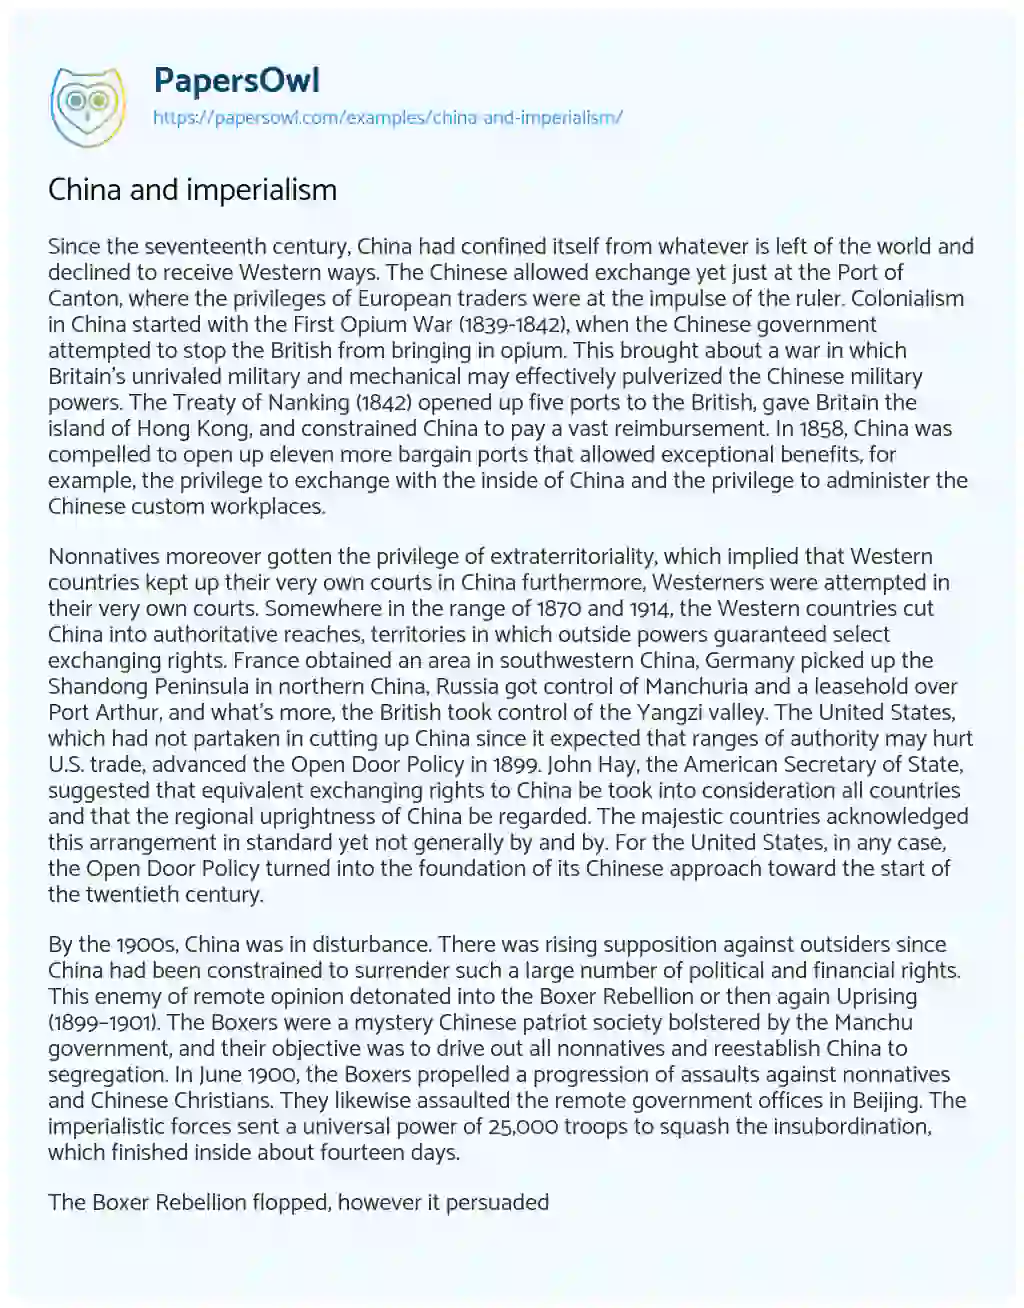 Essay on China and Imperialism